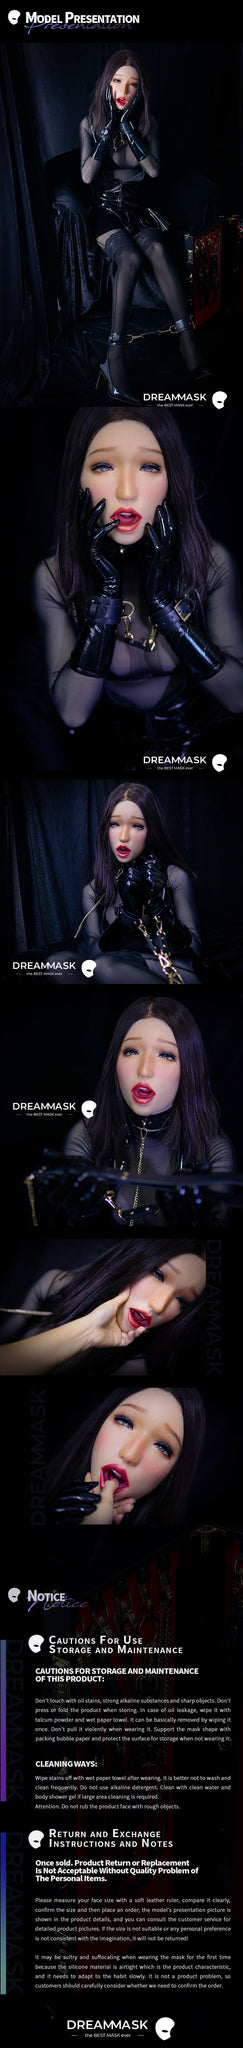 Full head Silicone Female Mask Dreammask M18 Violet Pull-Over Hood Crossdress Cosplay for TG CD Dragqueen Ladyboy